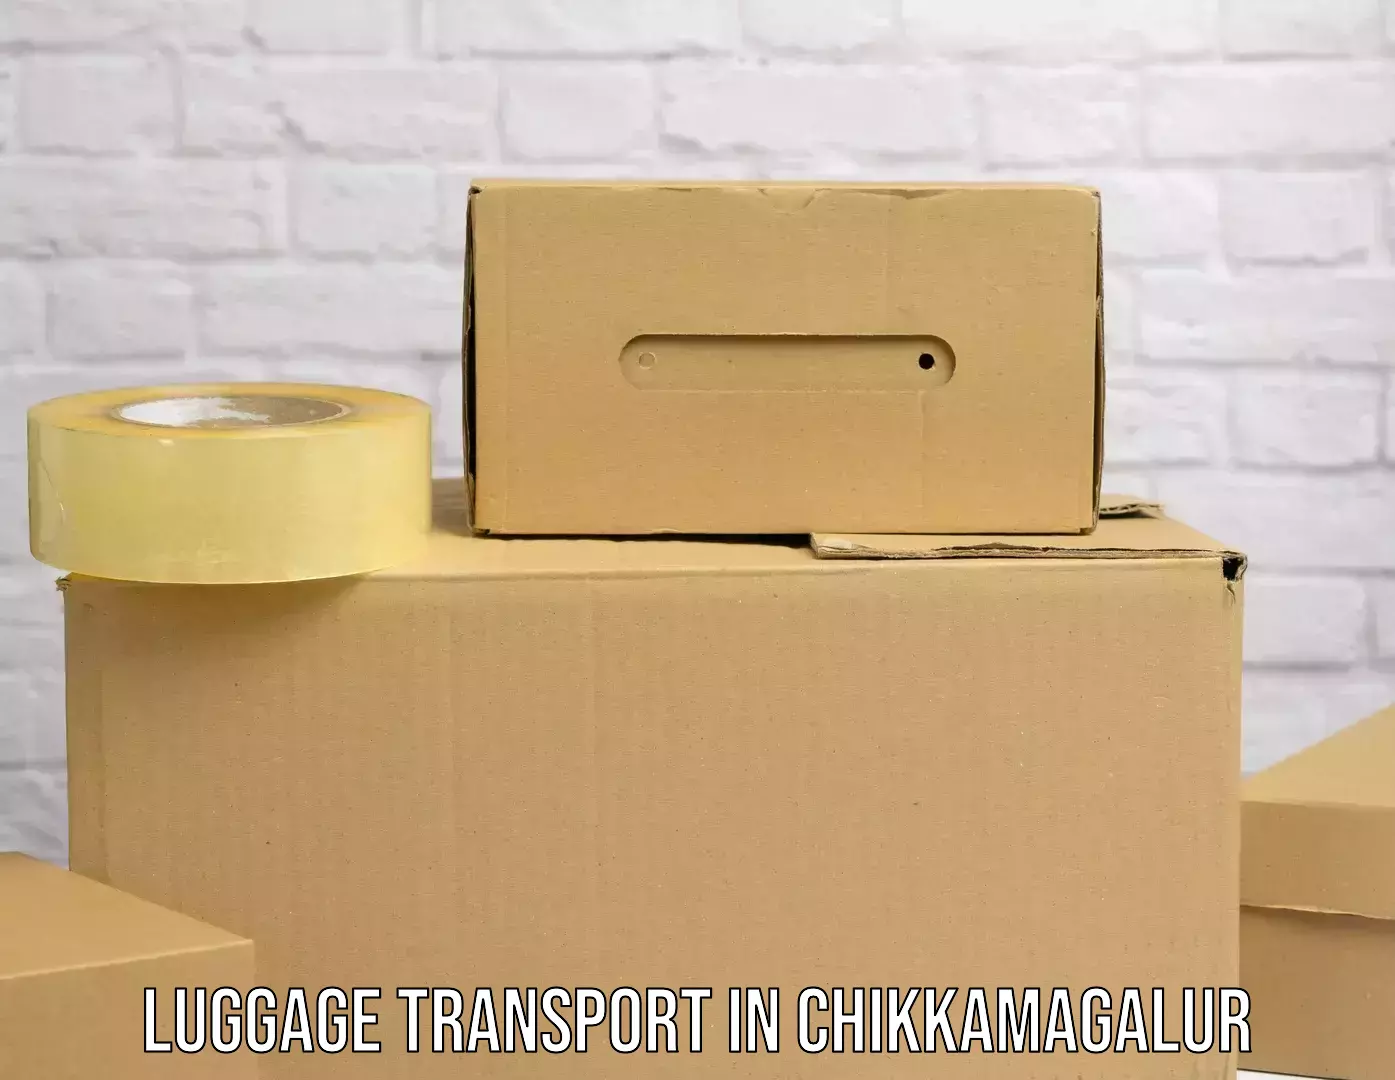 Weekend baggage shipping in Chikkamagalur